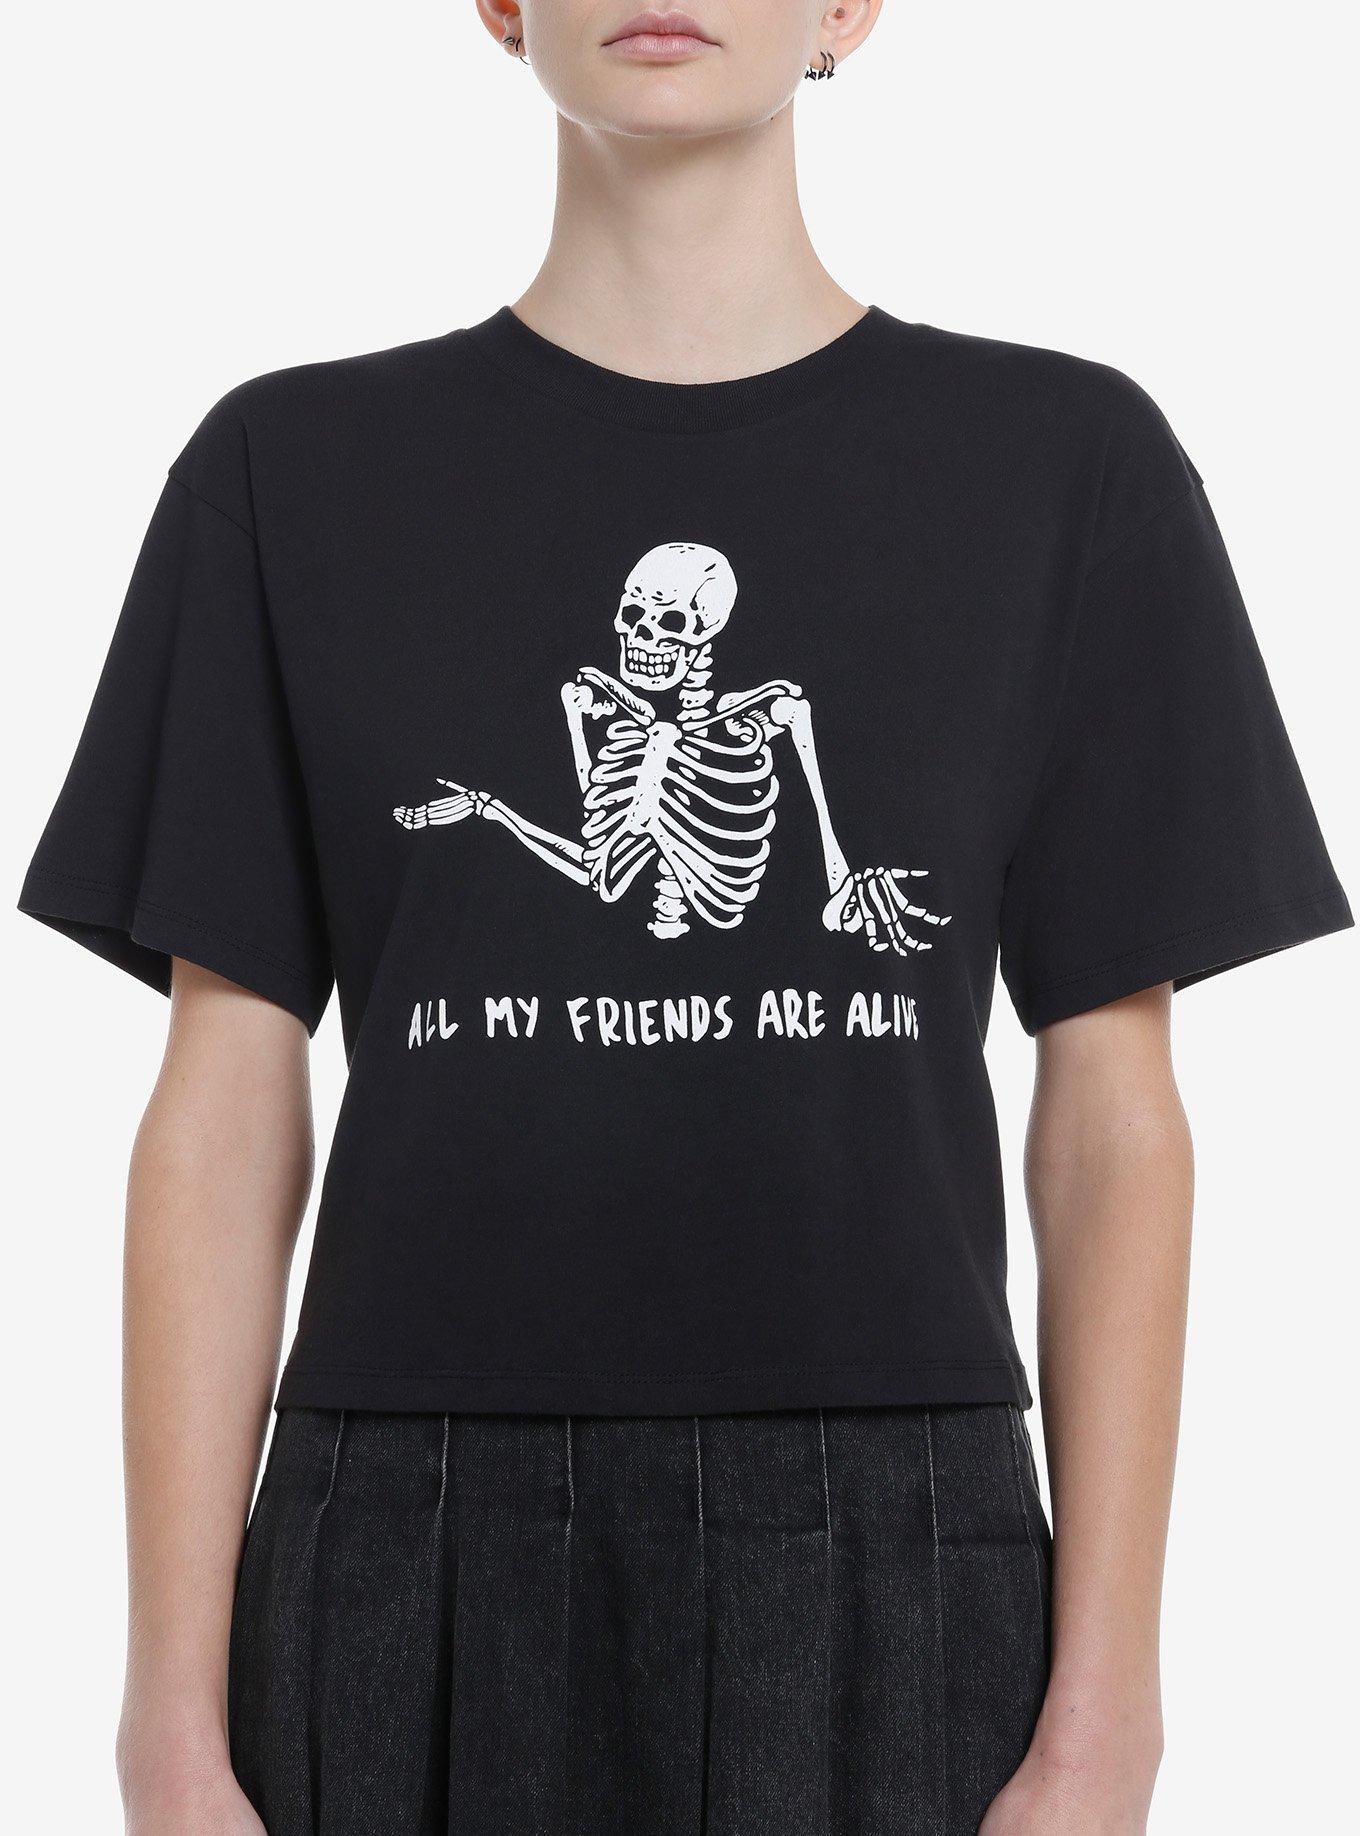 All My Friends Are Dead Girls Crop T-Shirt By Friday Jr.